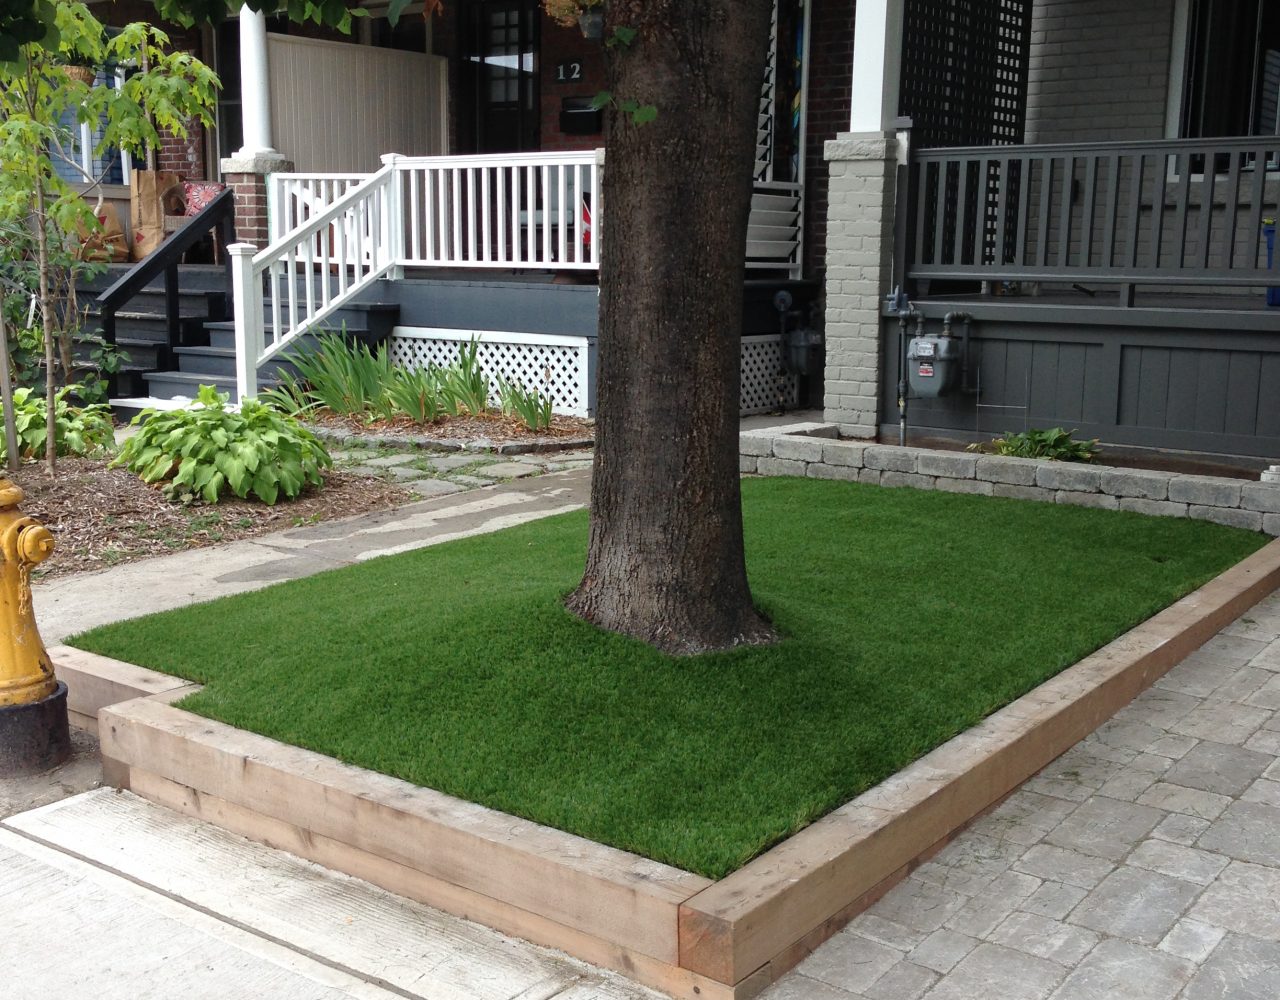 Great solutions for small areas under trees